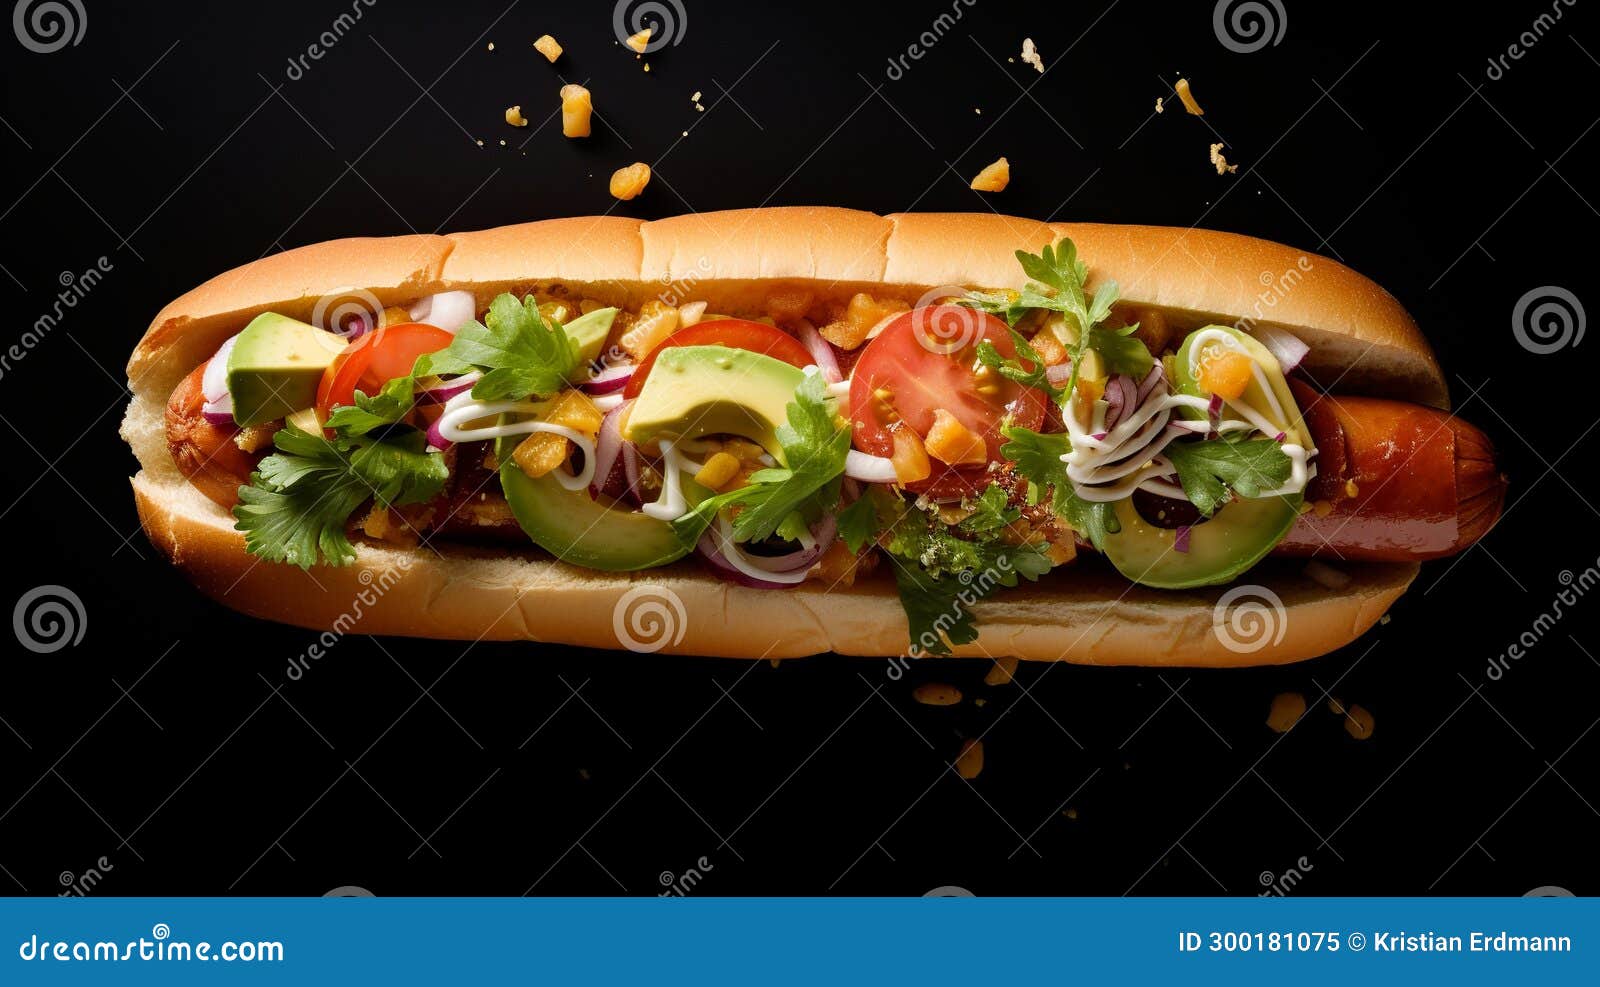 completo: chilean loaded hot dog with avocado, tomato, and more